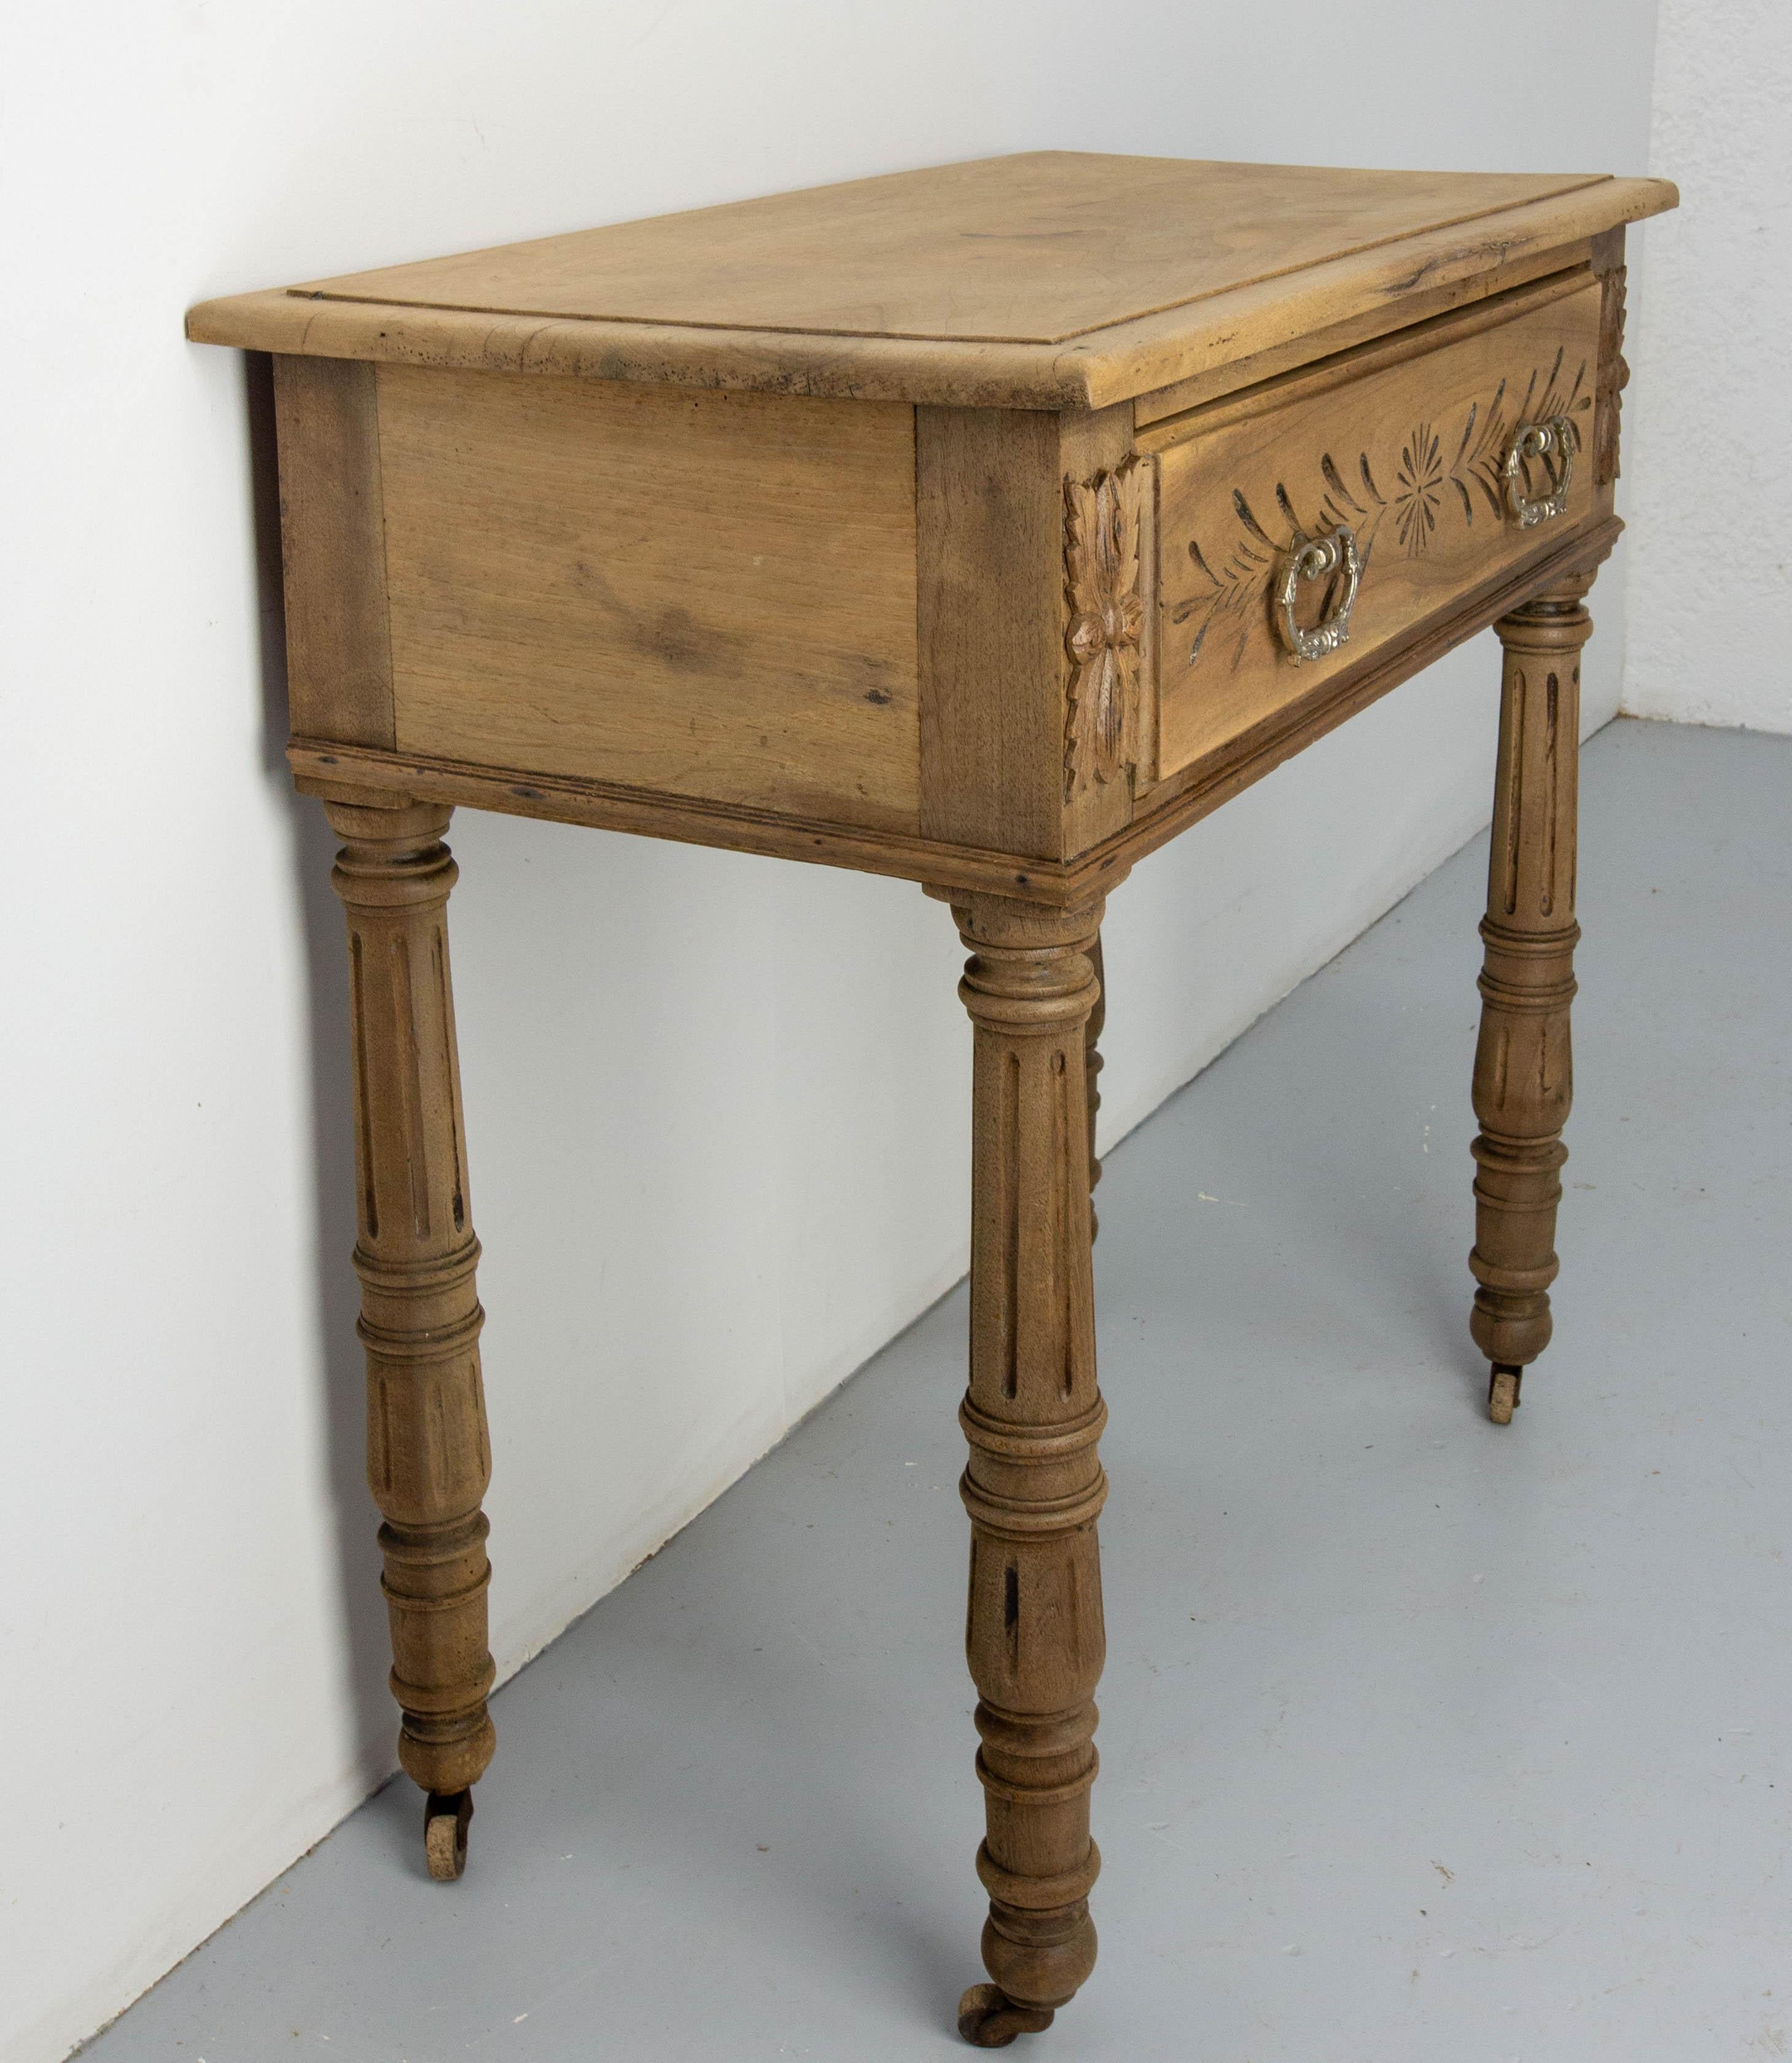 Hand-Carved French 19th Century Writing Table on Wheels Carved Walnut Desk English Style For Sale